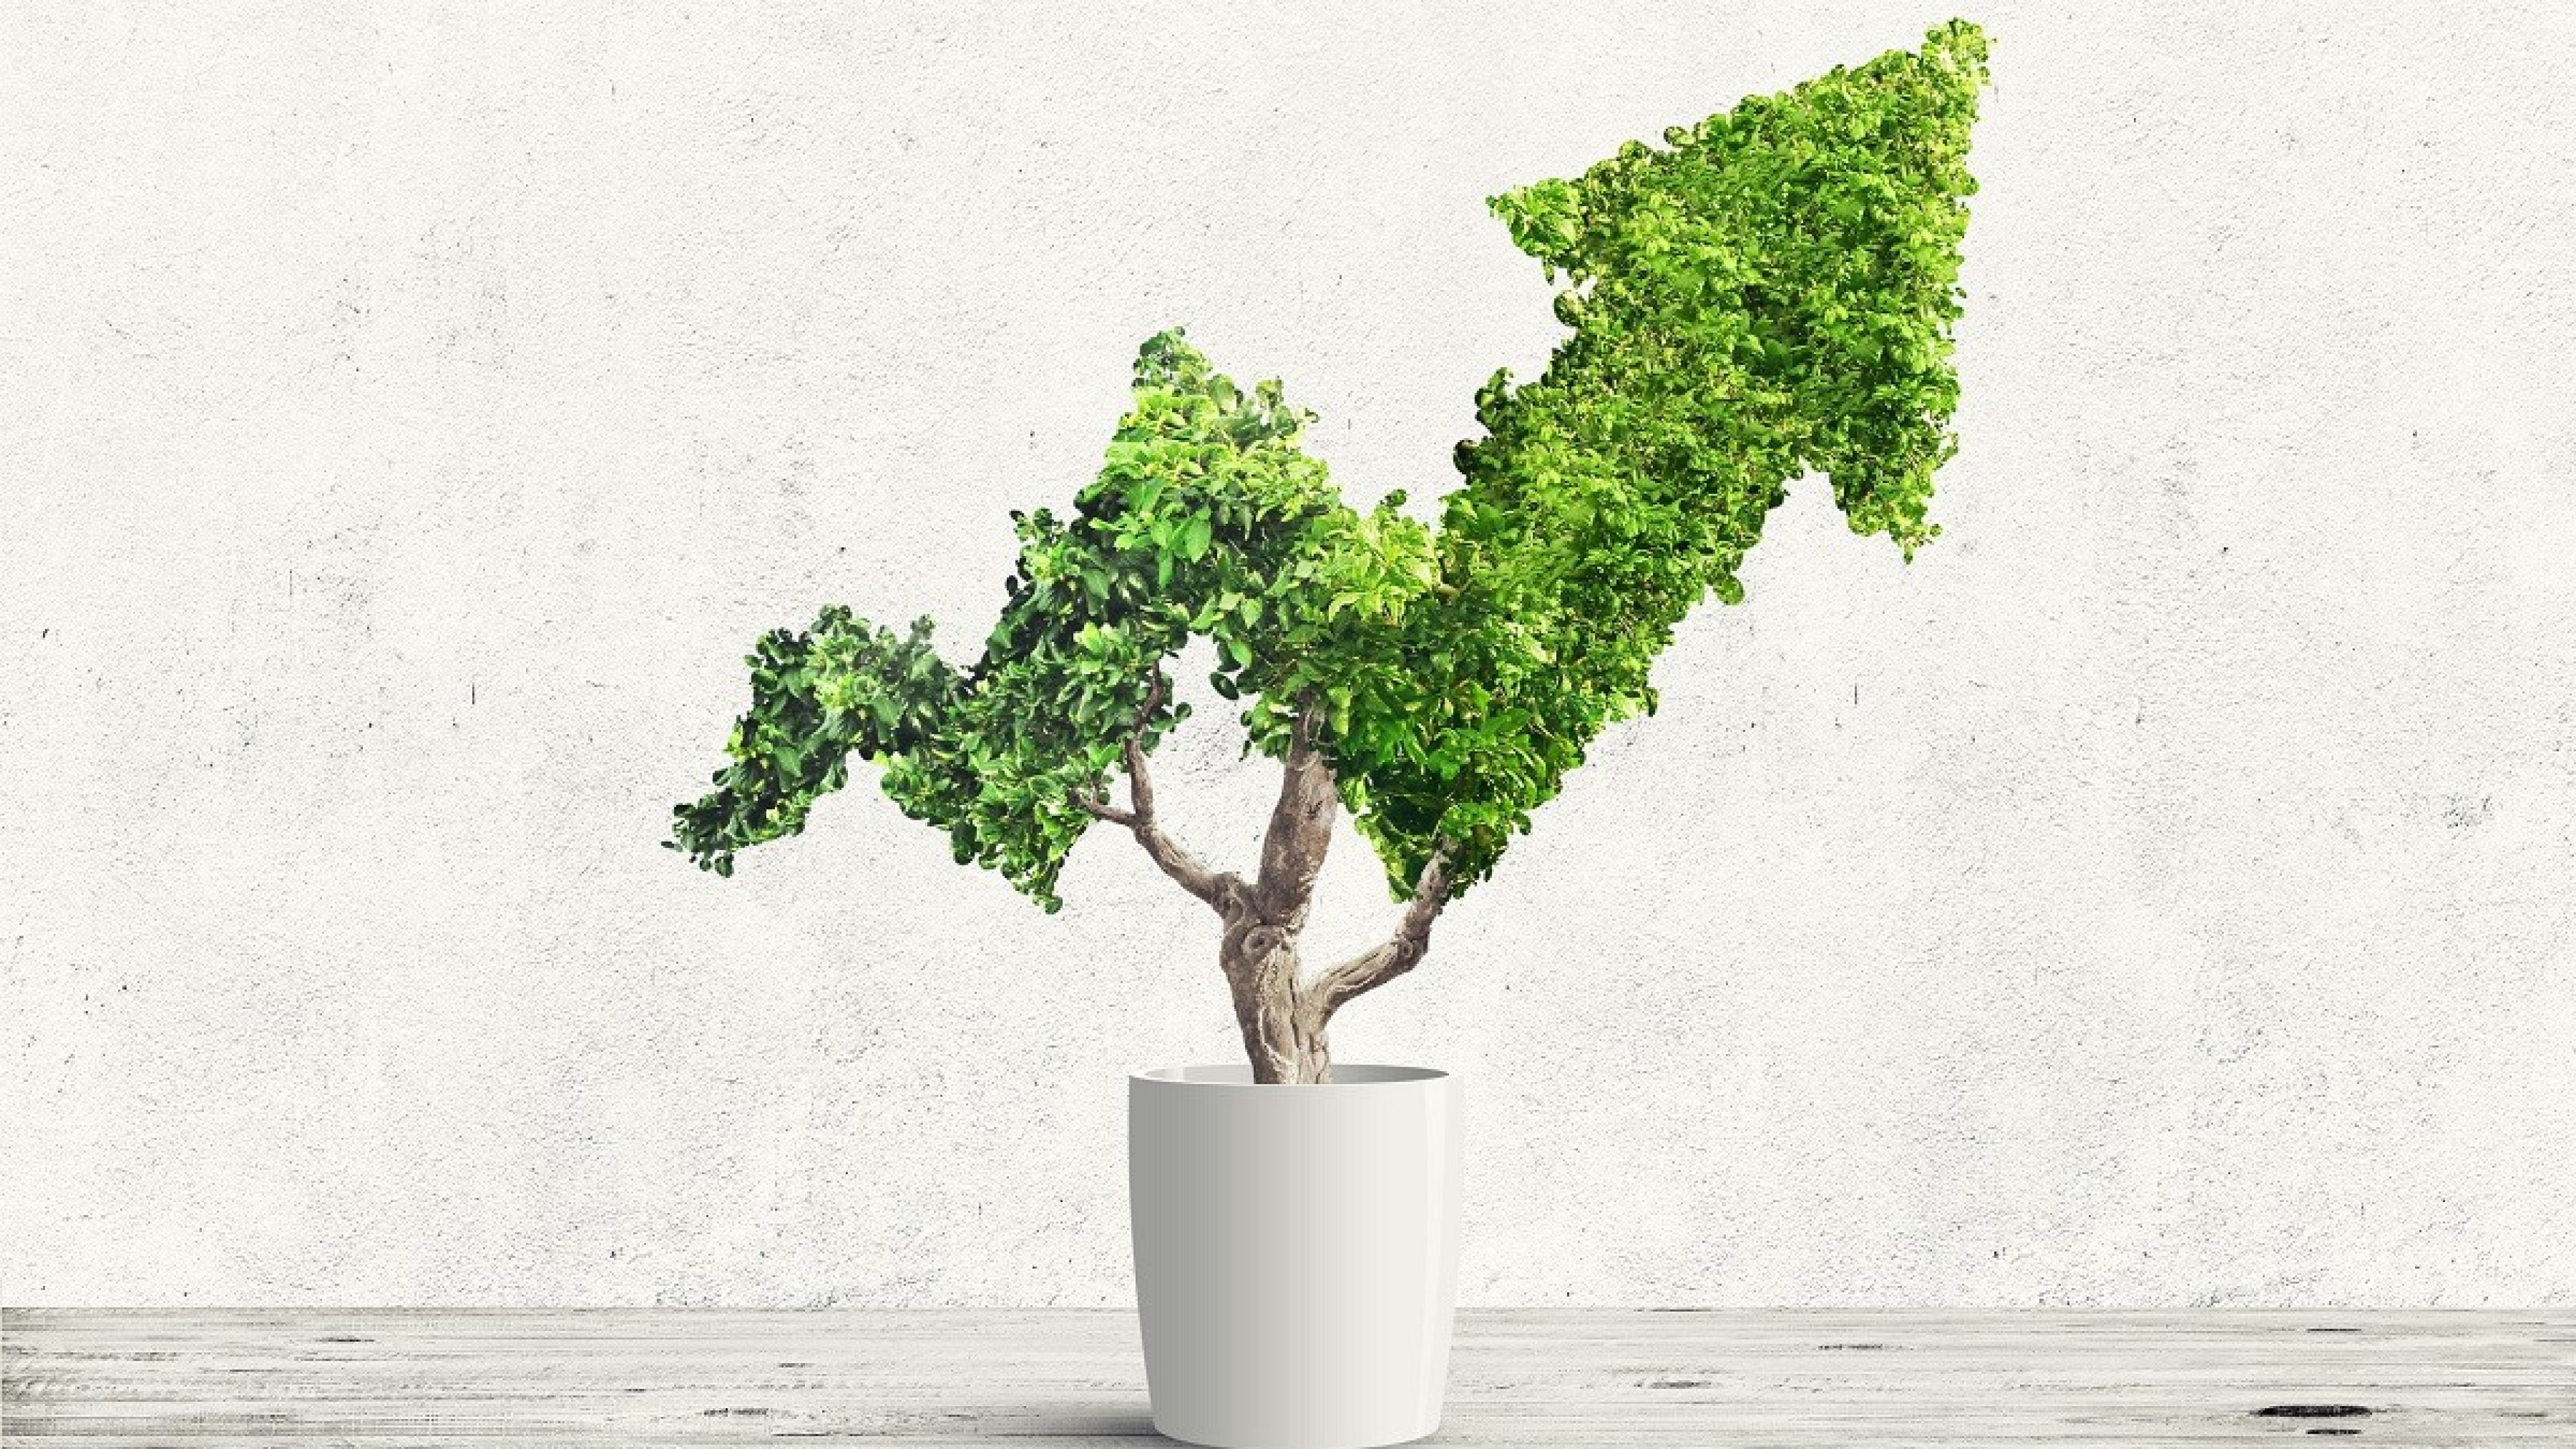 Potted green plant grows up in arrow shape over blue background. Concept business image